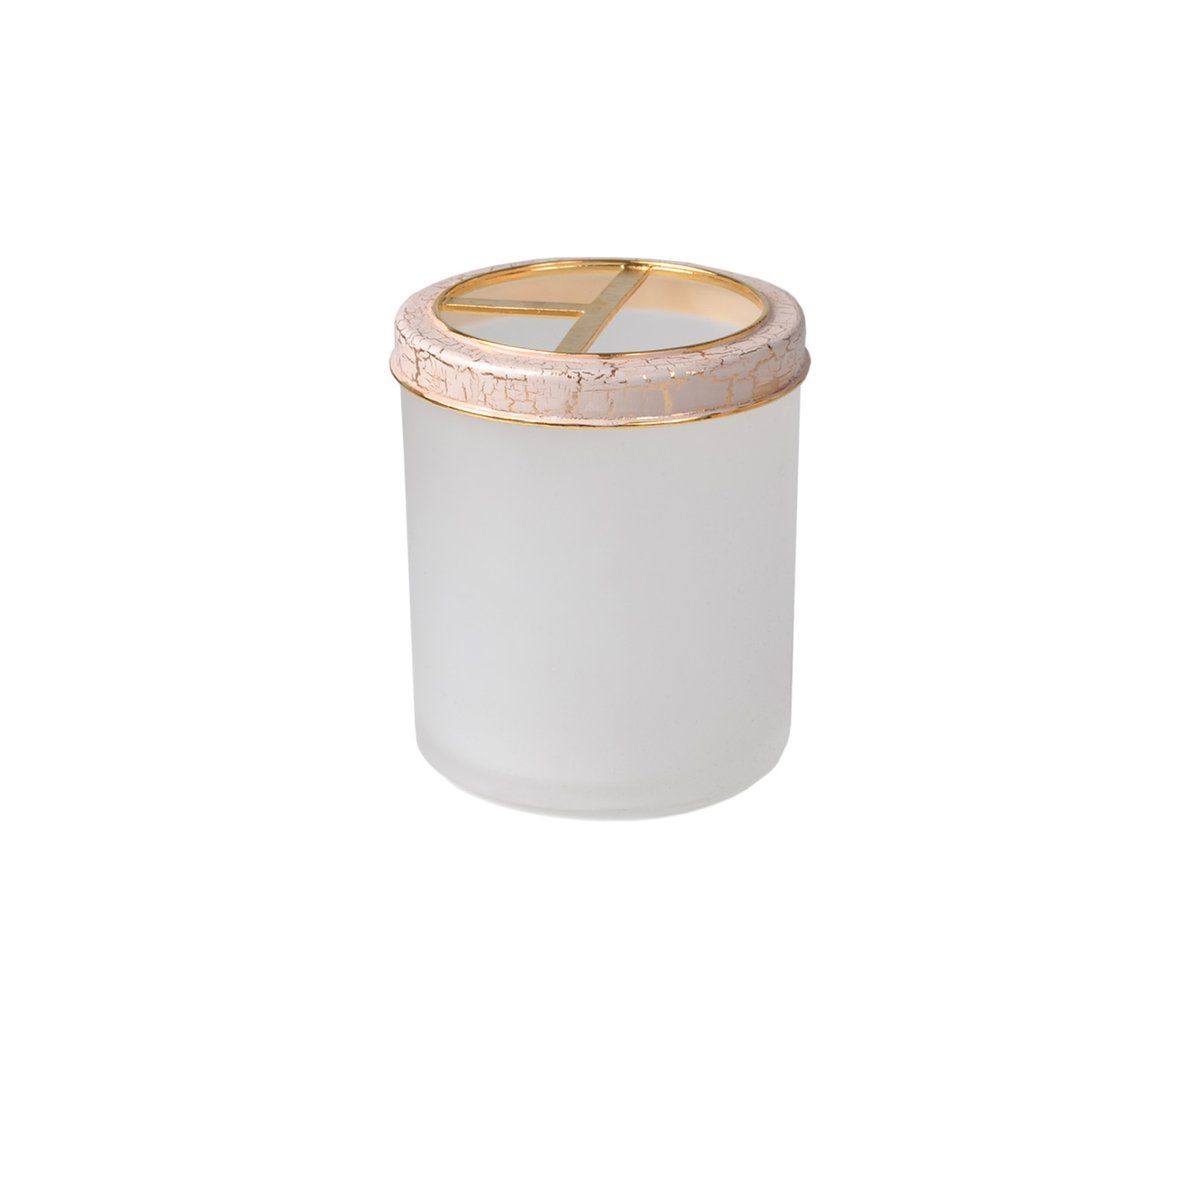 Taupe Color Mike and Ally Forét Bath Accessories Toothbrush Holder